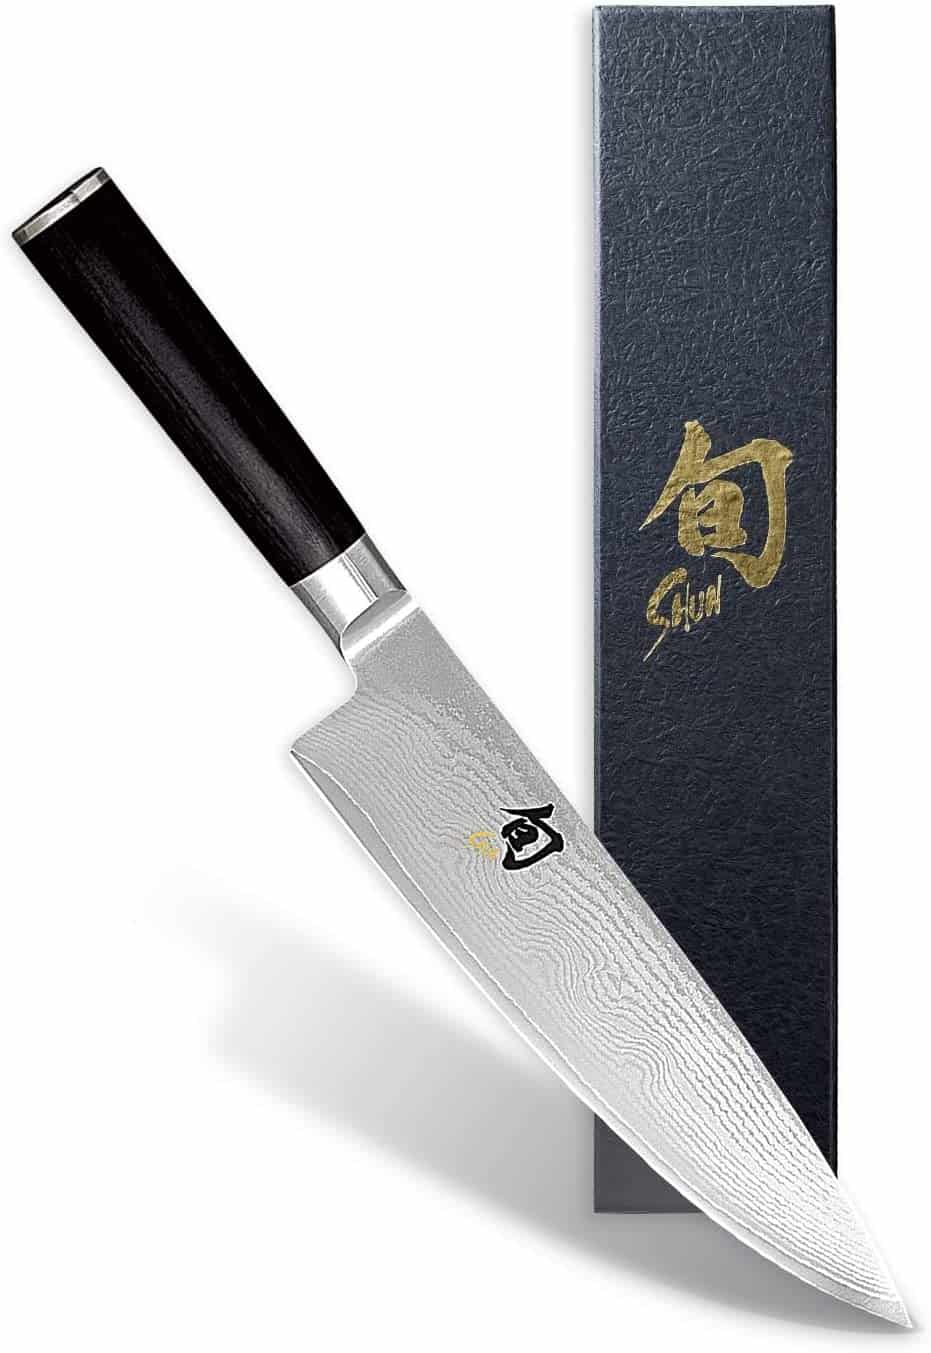 Best overall knife for hibachi- Shun Classic 8” Chef’s Knife